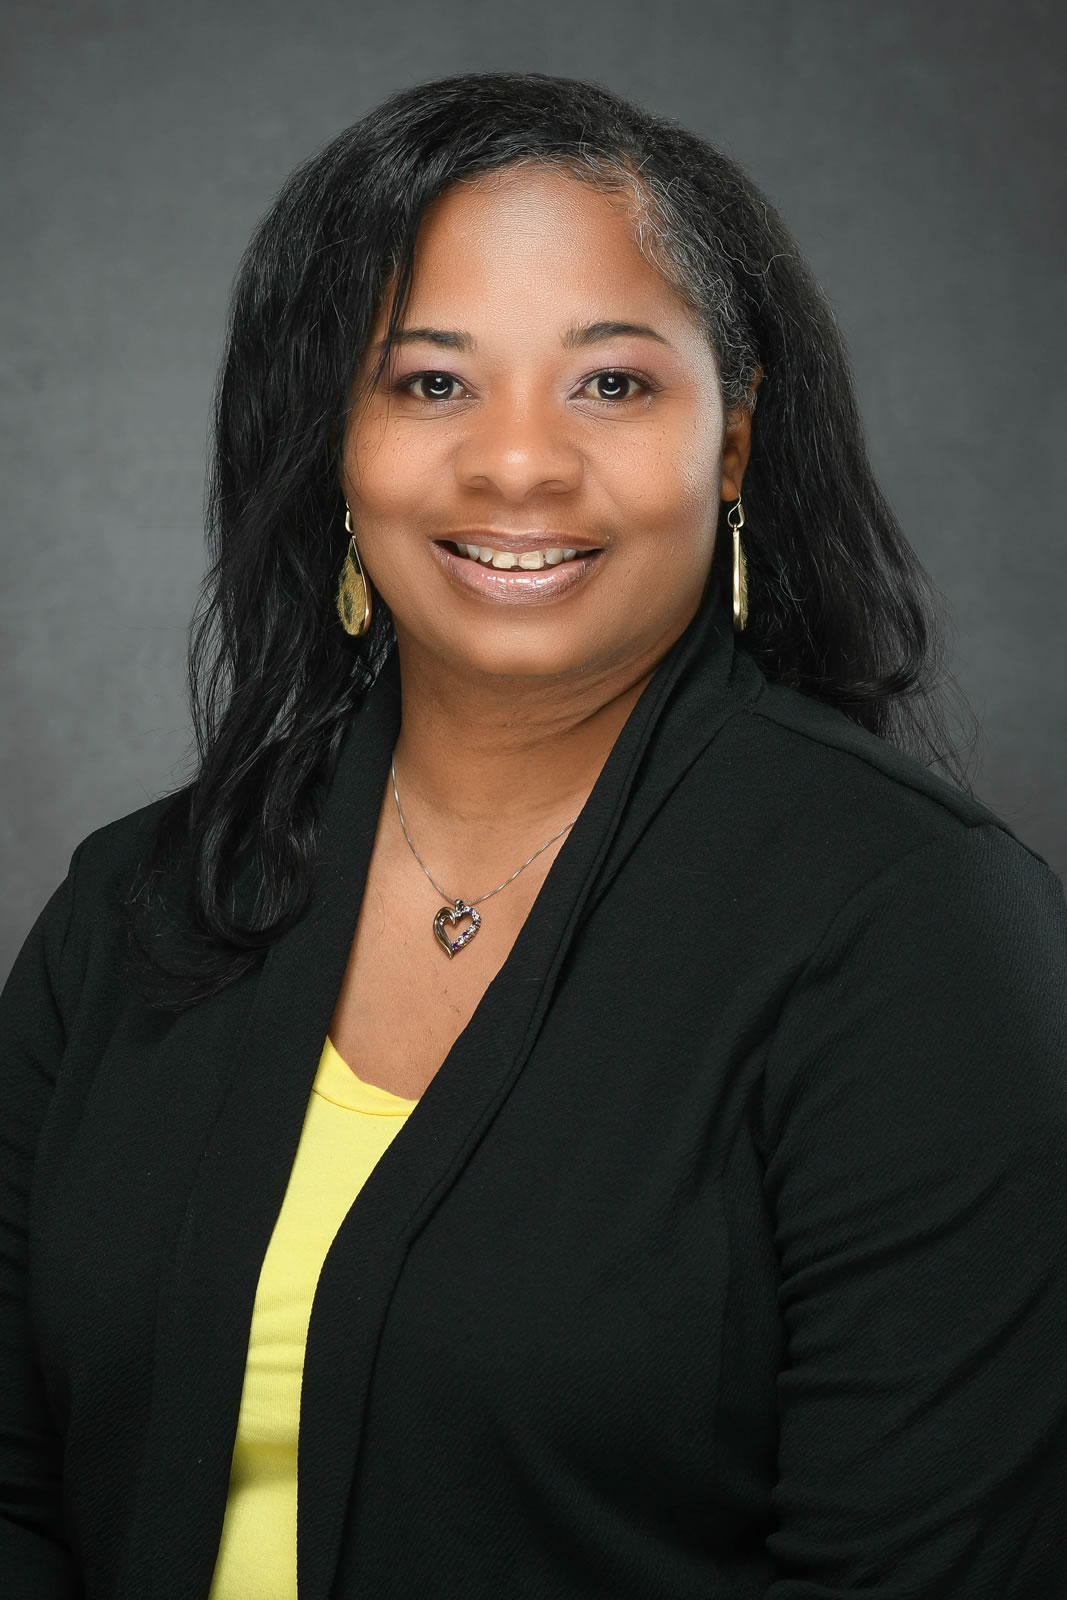 Dr. Tanya Brandy, Psy.D, LMSW - Phi Alpha National Honor Society Advisor and Lecturer 